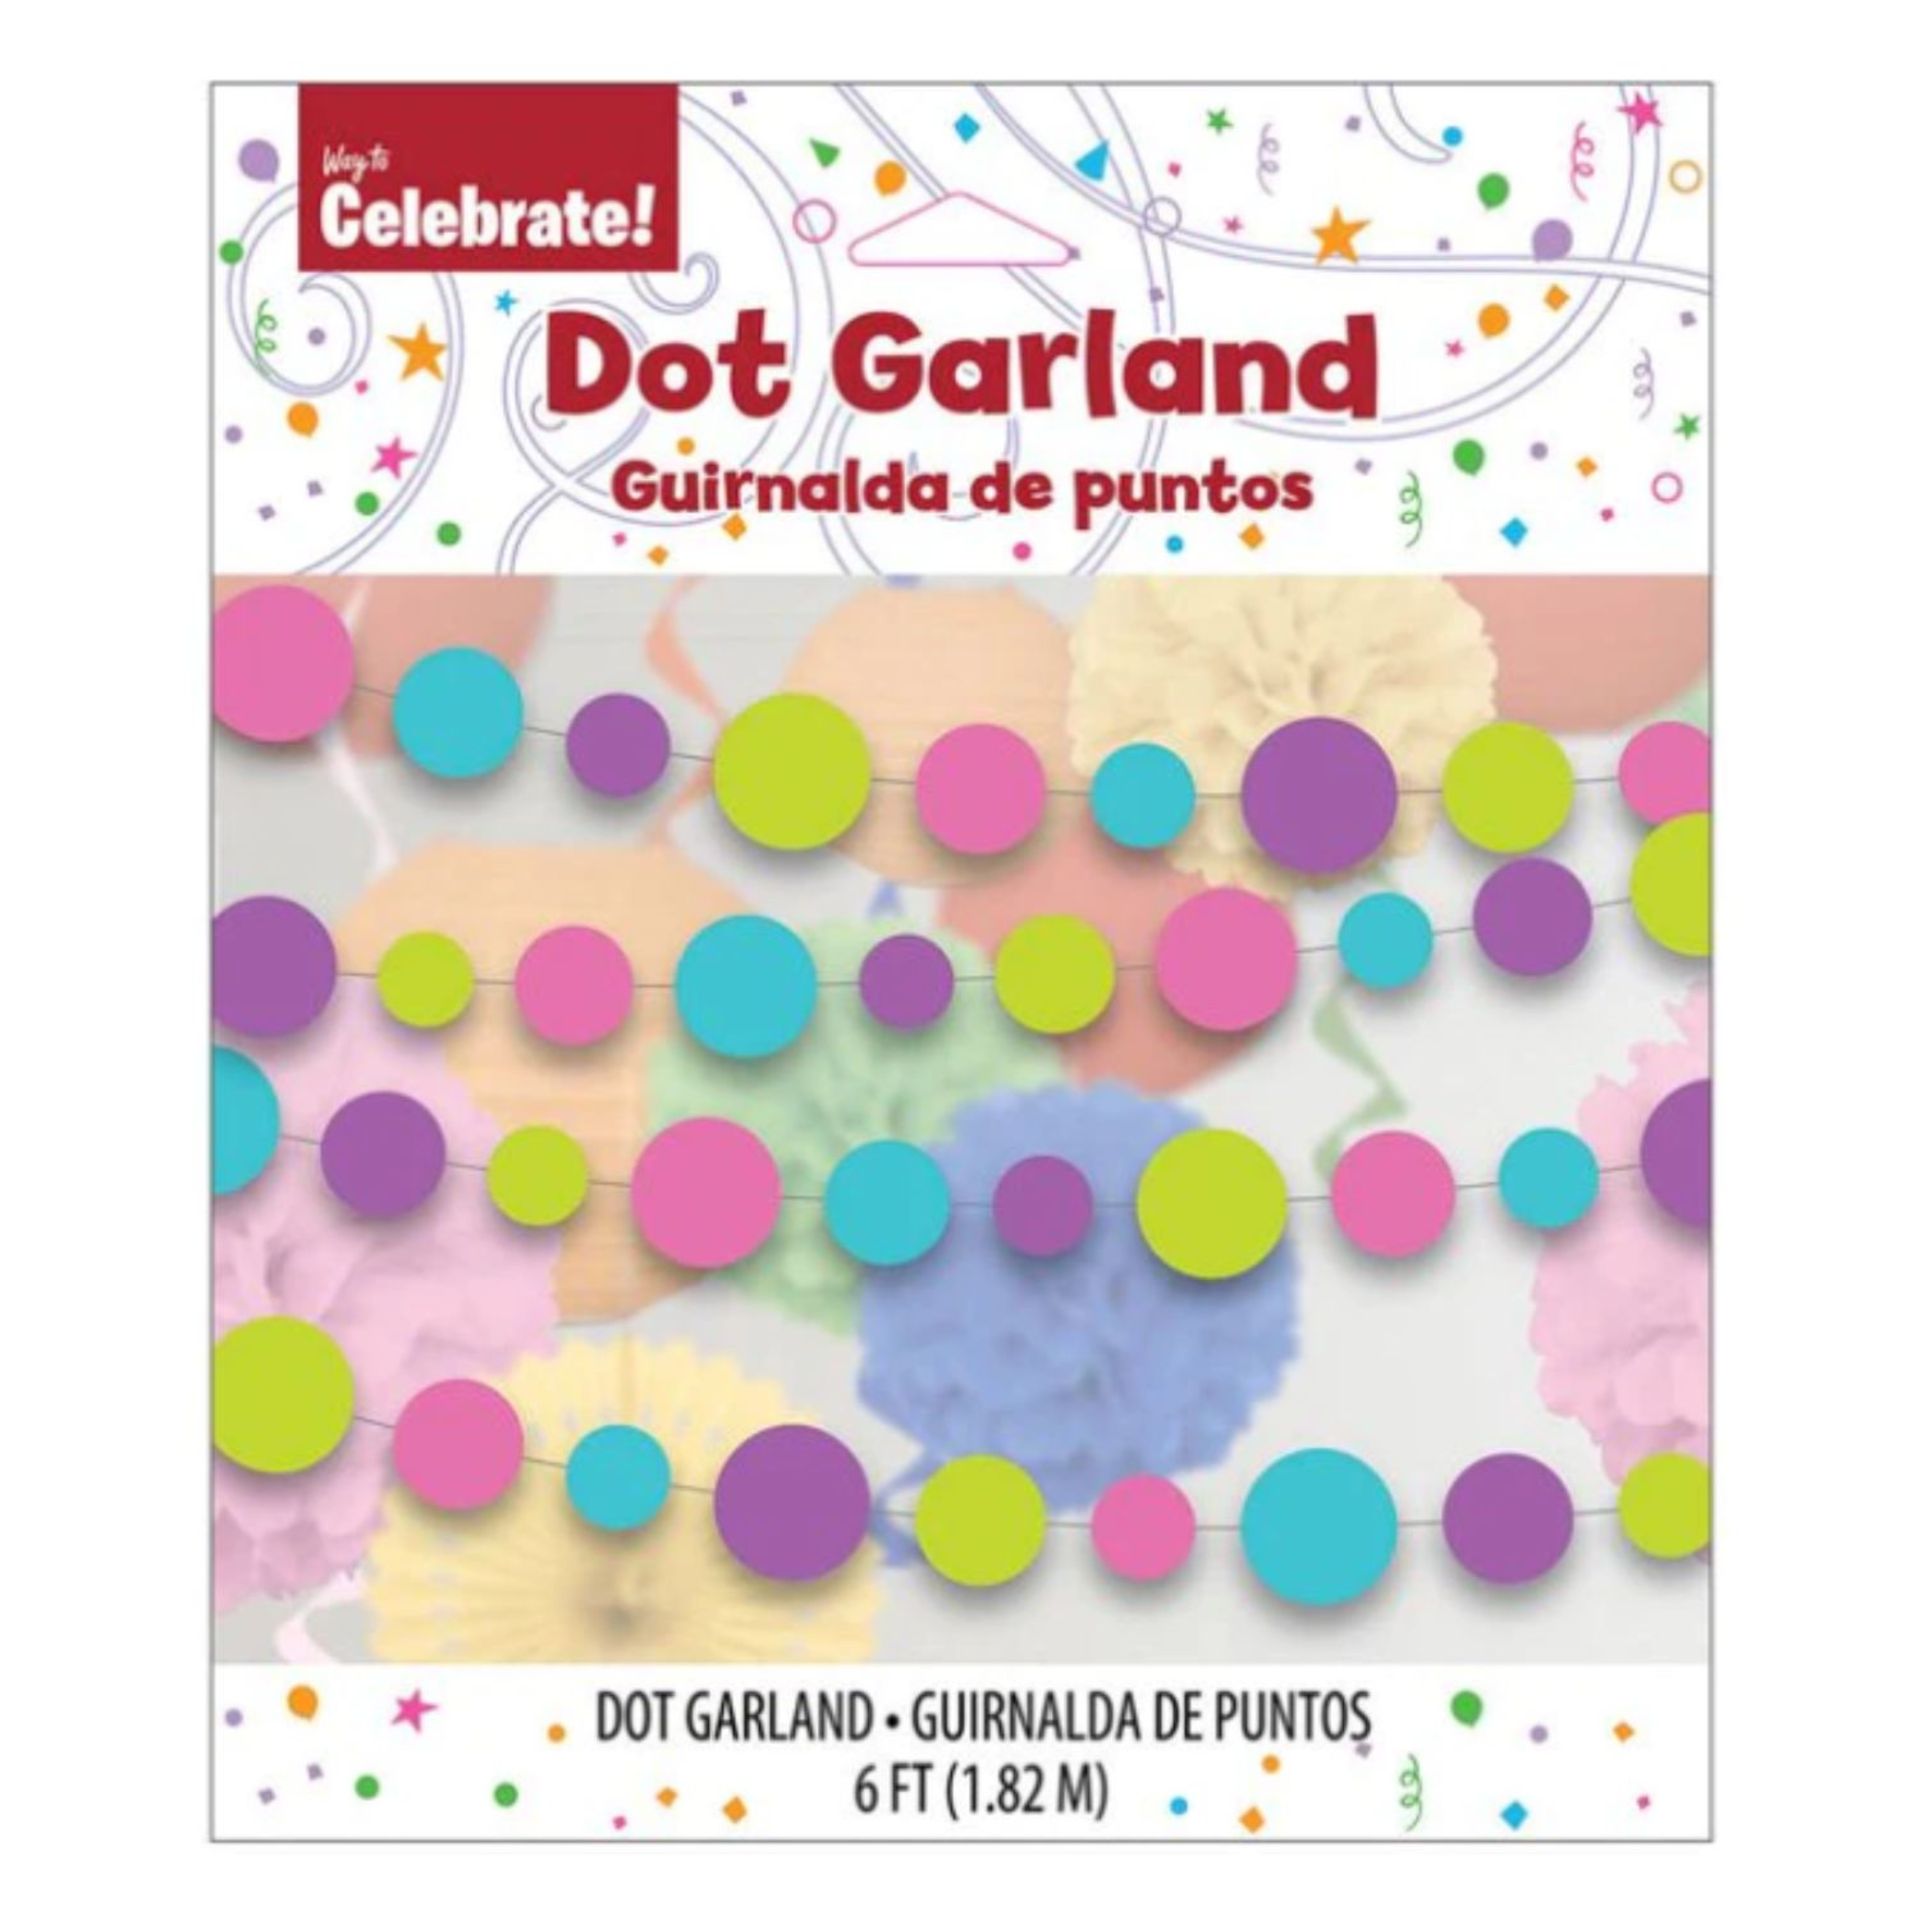 1000 PARTY SUPPLIES BOLD DOTS PAPER GARLAND, 6FT, PINK, GREEN, BLUE & PURPLE RRP £10,000